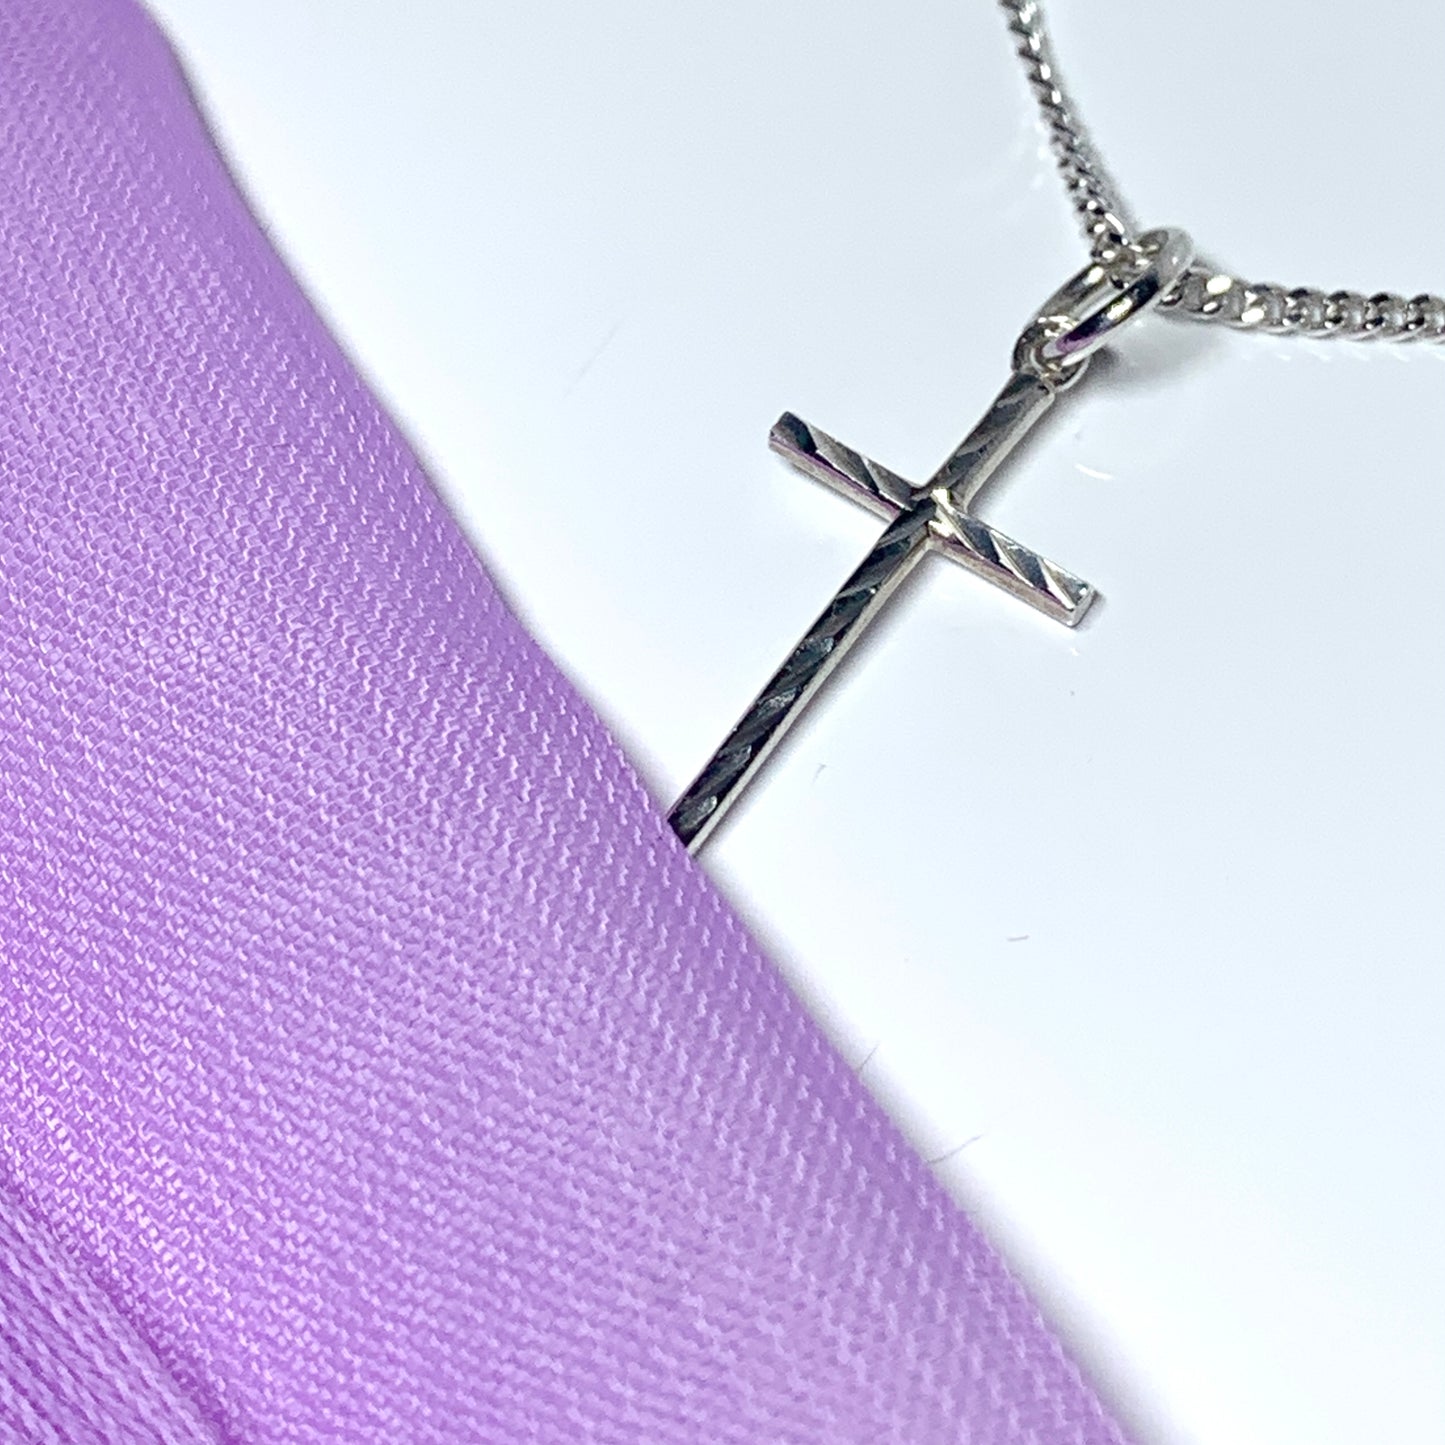 Small solid diamond cut reversible cross patterned sterling silver and chain